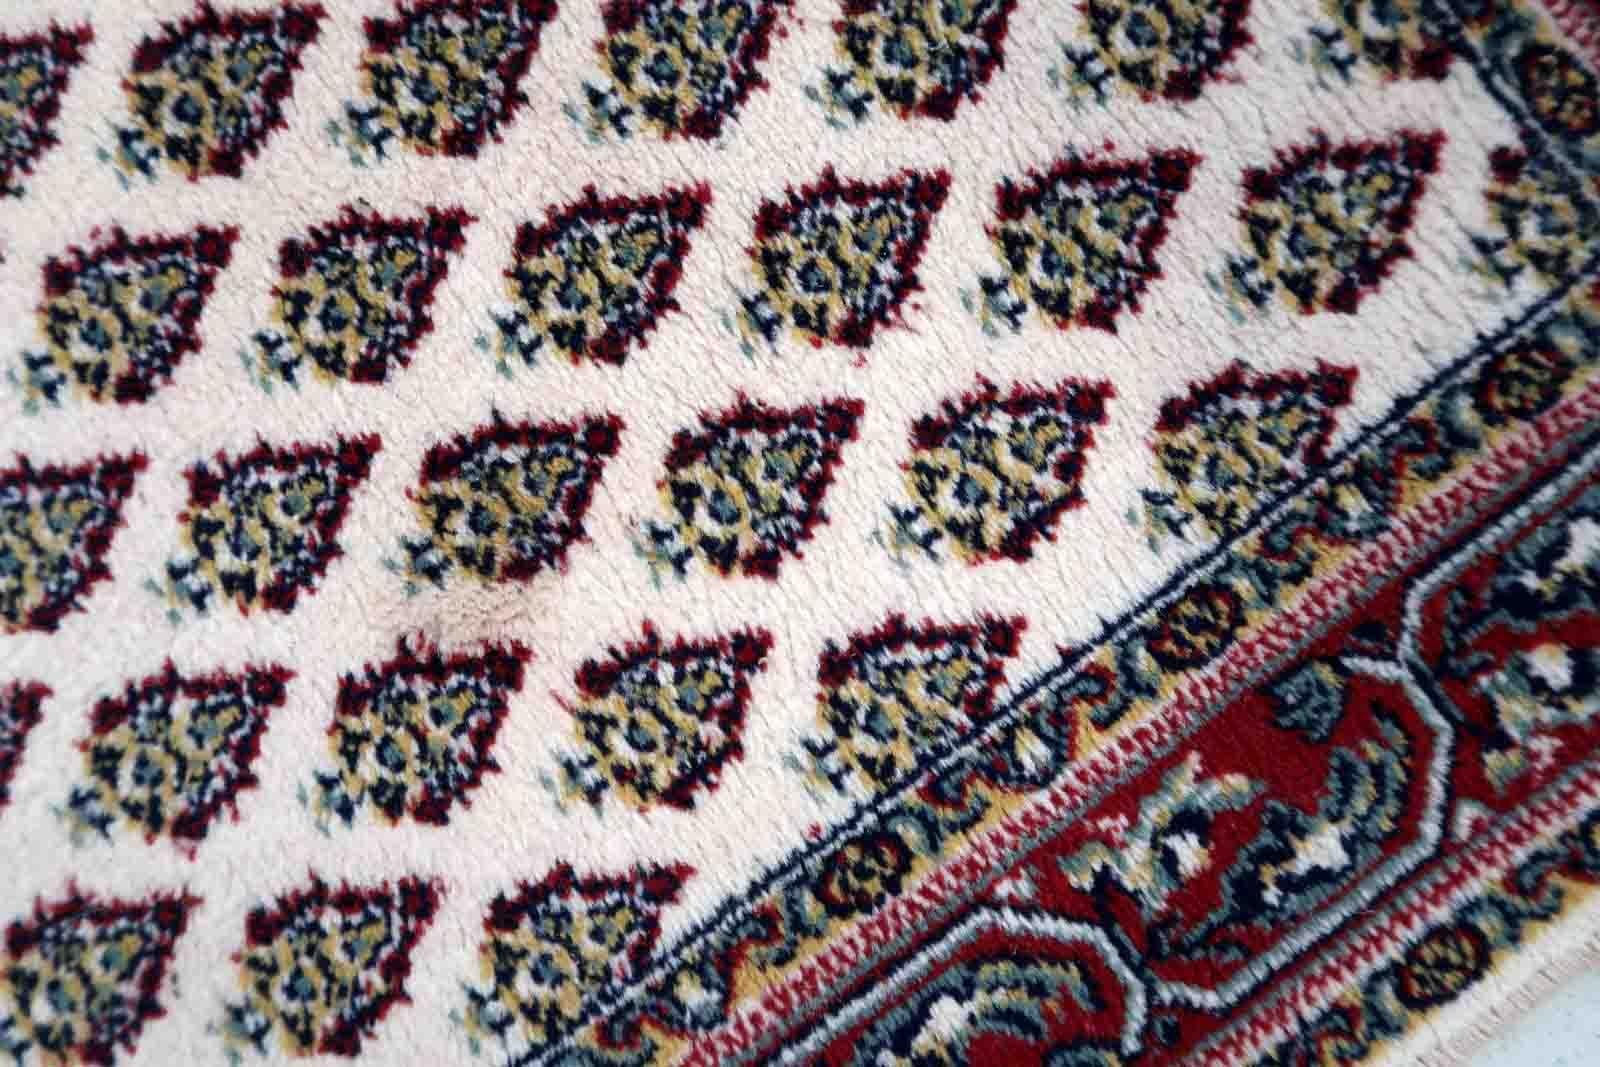 Vintage rug from Italy made in Persian Seraband design. The rug is in original good condition from the end of 20th century. It is machine made piece.

-condition: original good,

-circa: 1970s,

-size: 2.2' x 4.5' (68cm x 140cm),

-material: